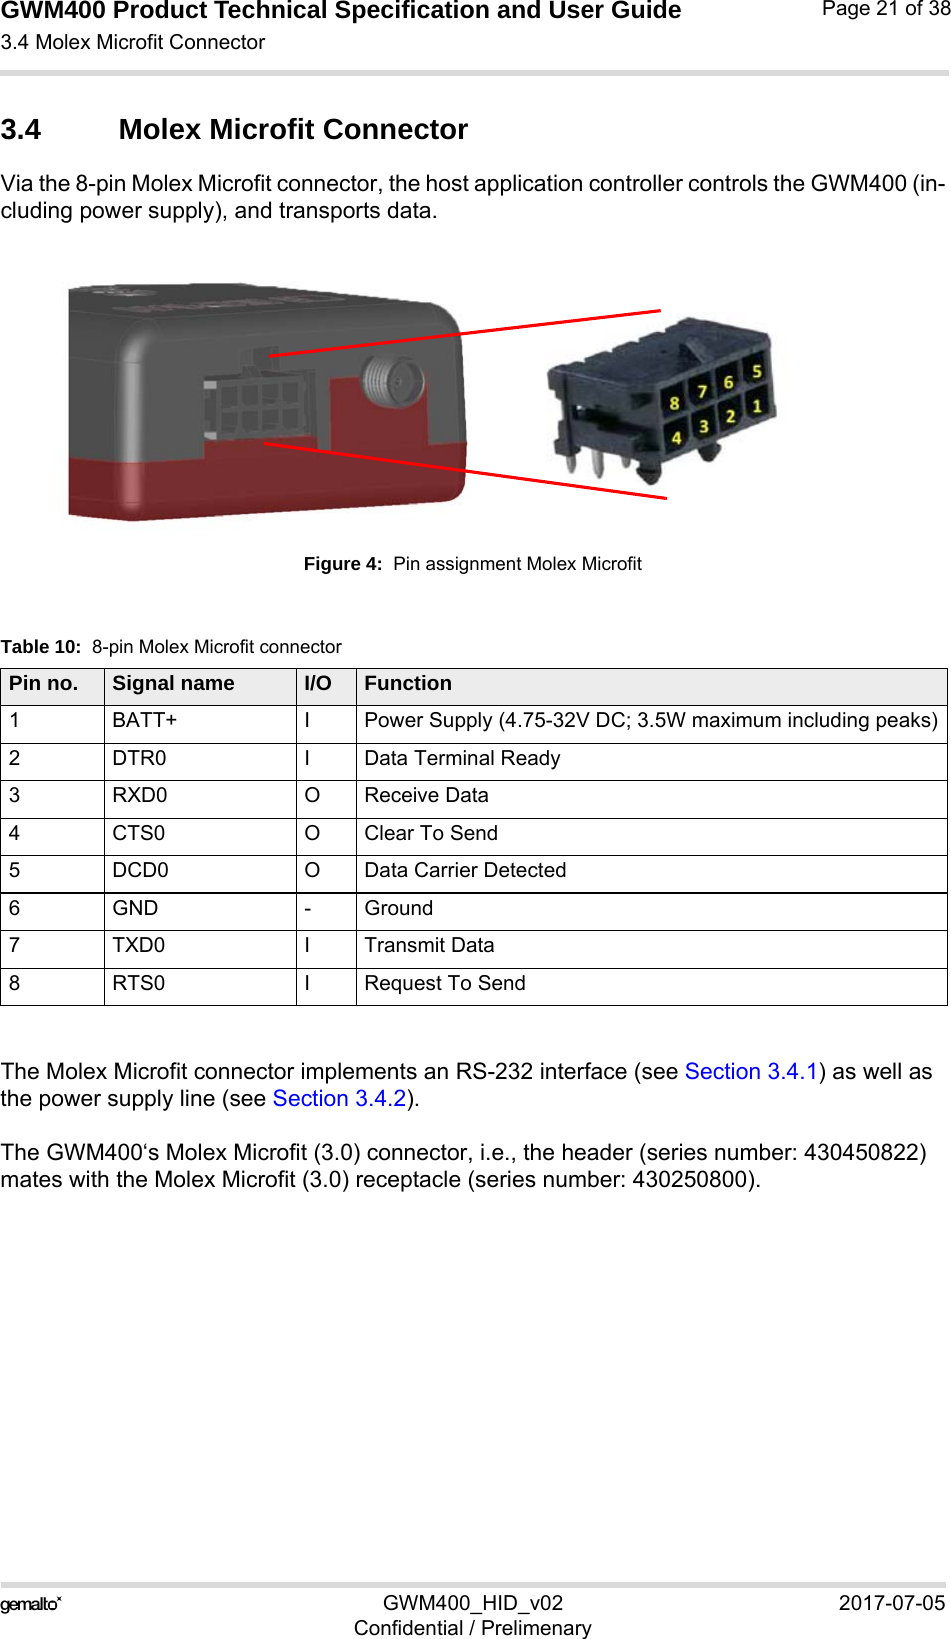 GWM400 Product Technical Specification and User Guide3.4 Molex Microfit Connector25GWM400_HID_v02 2017-07-05Confidential / PrelimenaryPage 21 of 383.4 Molex Microfit ConnectorVia the 8-pin Molex Microfit connector, the host application controller controls the GWM400 (in-cluding power supply), and transports data.Figure 4:  Pin assignment Molex MicrofitThe Molex Microfit connector implements an RS-232 interface (see Section 3.4.1) as well as the power supply line (see Section 3.4.2).The GWM400‘s Molex Microfit (3.0) connector, i.e., the header (series number: 430450822) mates with the Molex Microfit (3.0) receptacle (series number: 430250800).Table 10:  8-pin Molex Microfit connectorPin no. Signal name I/O Function1 BATT+ I Power Supply (4.75-32V DC; 3.5W maximum including peaks)2 DTR0 I Data Terminal Ready 3 RXD0 O Receive Data4 CTS0 O Clear To Send5 DCD0 O Data Carrier Detected6 GND - Ground7 TXD0 I Transmit Data8 RTS0 I Request To Send 